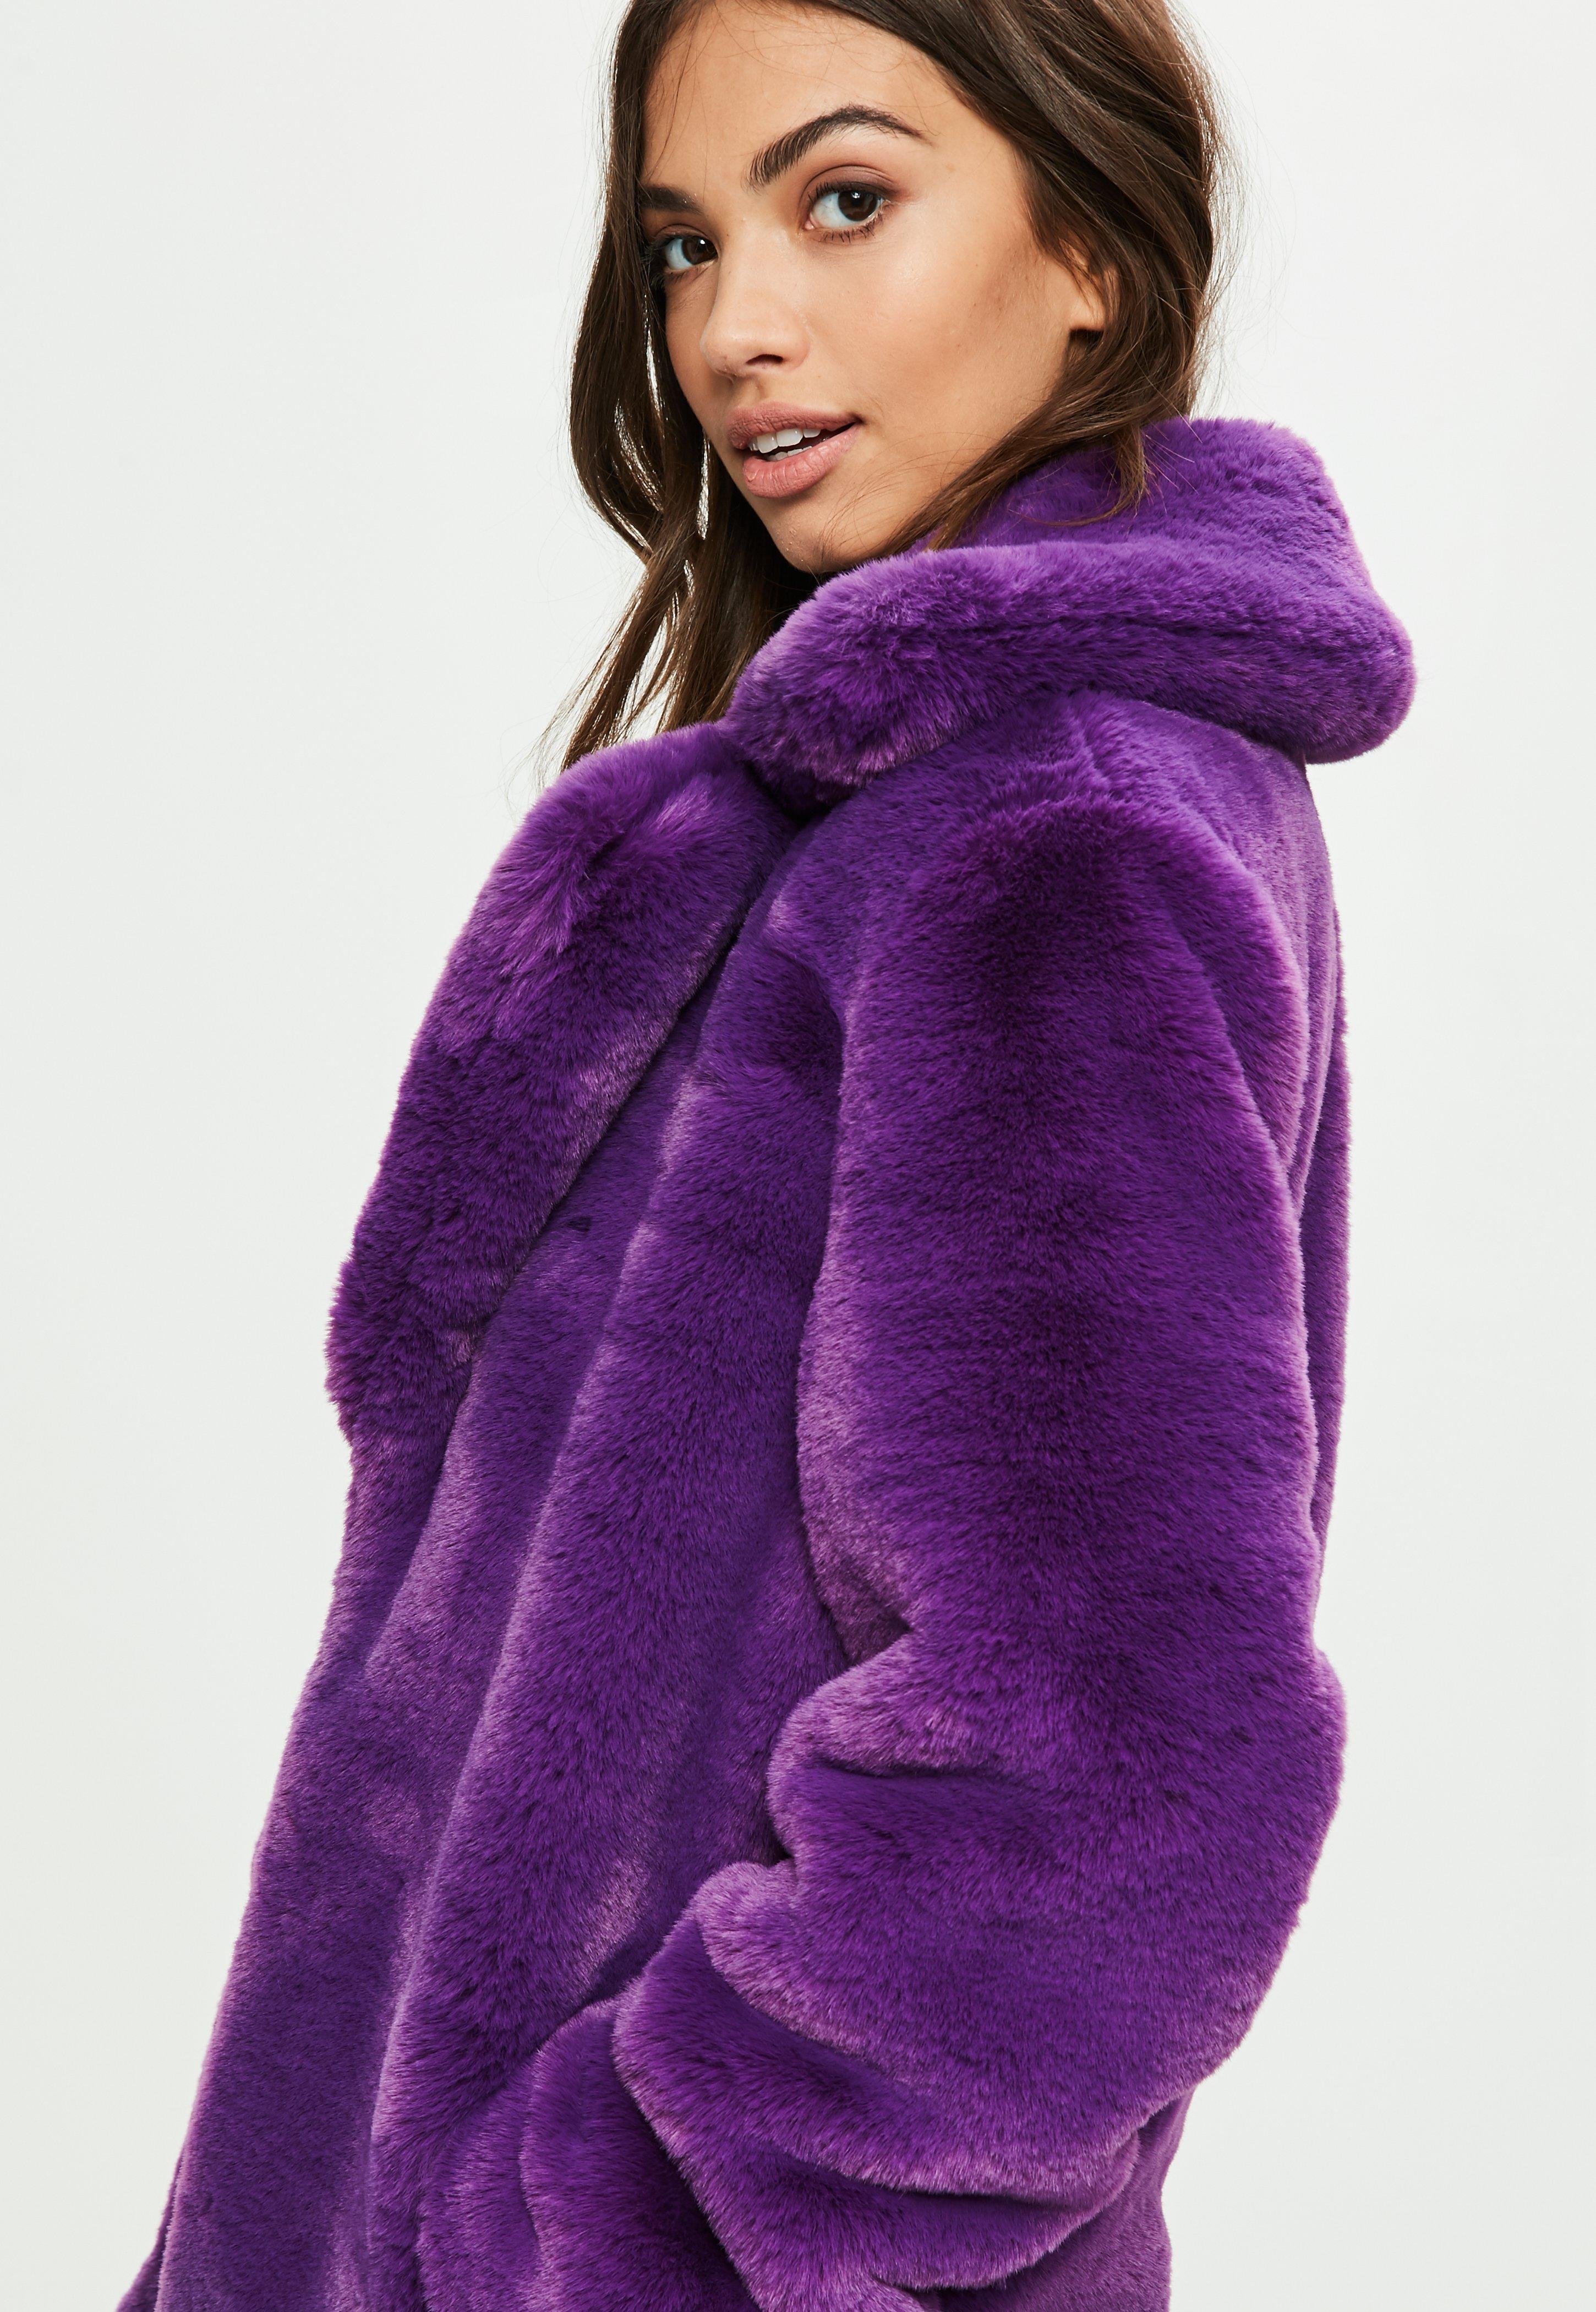 Missguided Purple Faux Fur Coat With Collar Lyst 